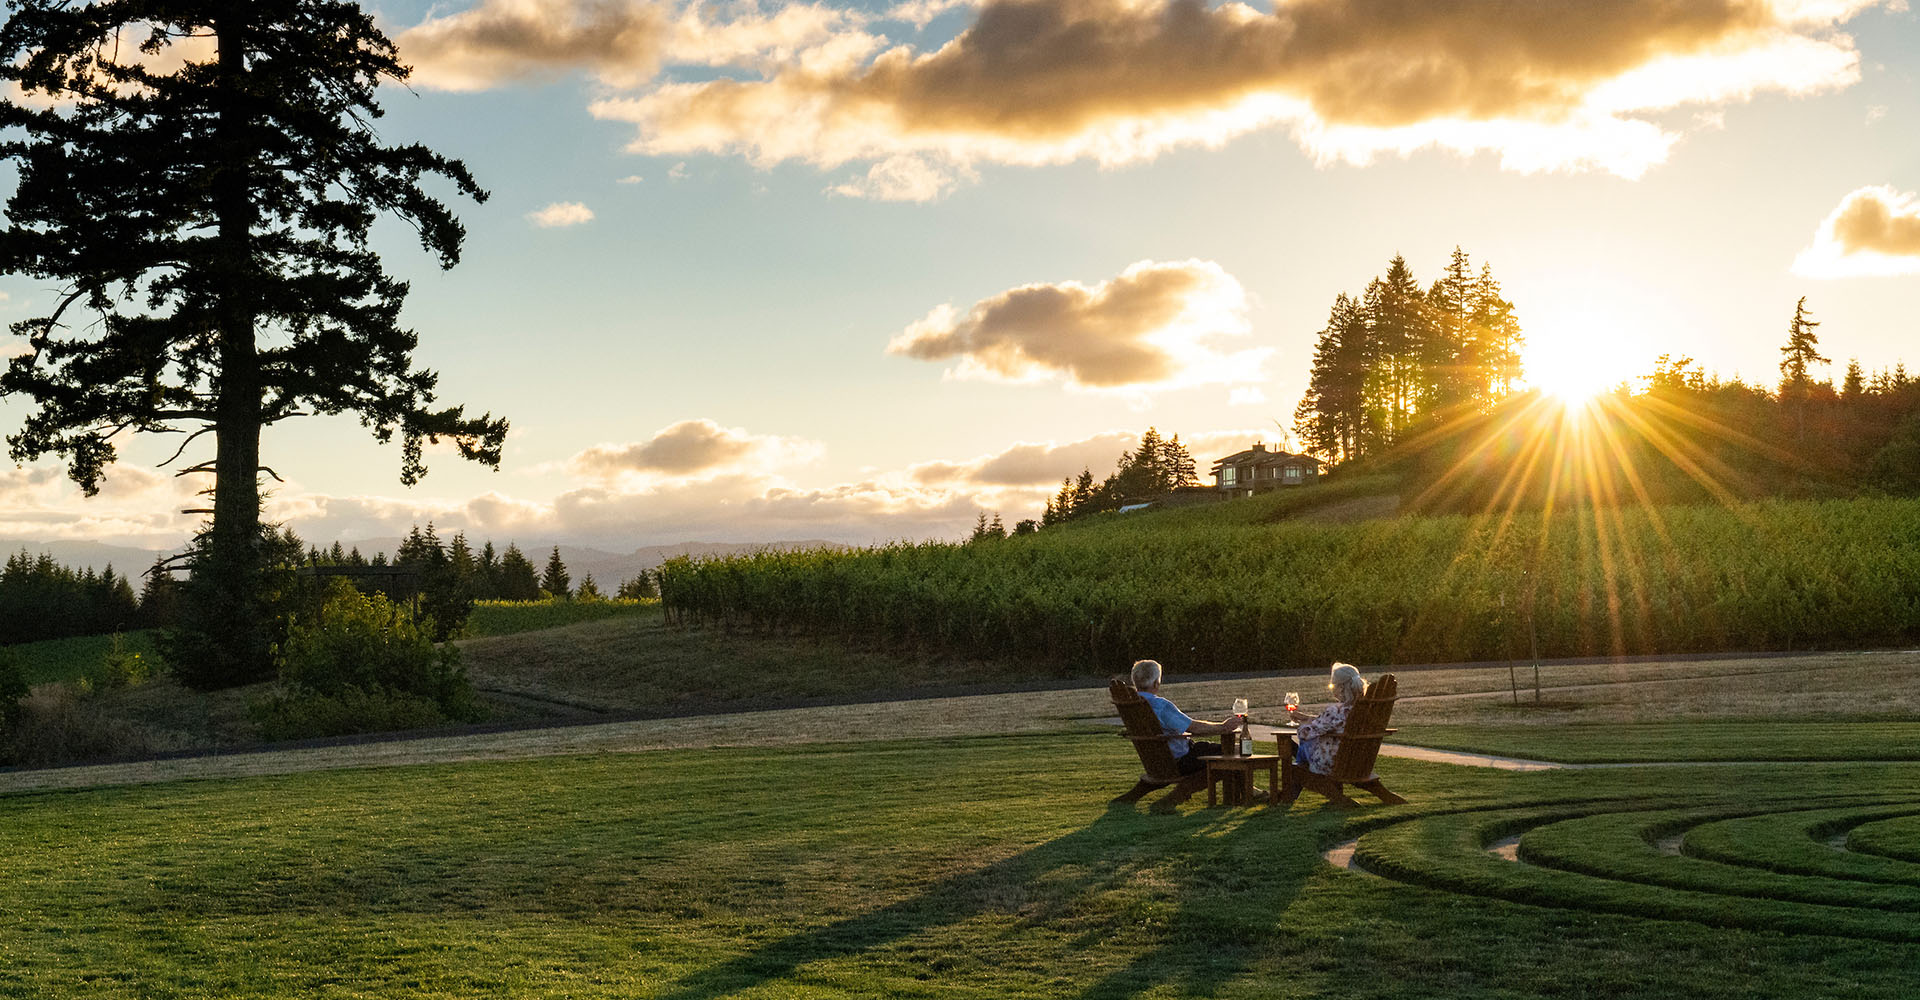 Fairsing Vineyard guest toast with glasses of Pinot noir grown on the family-owned estate in Oregon's Willamette Valley